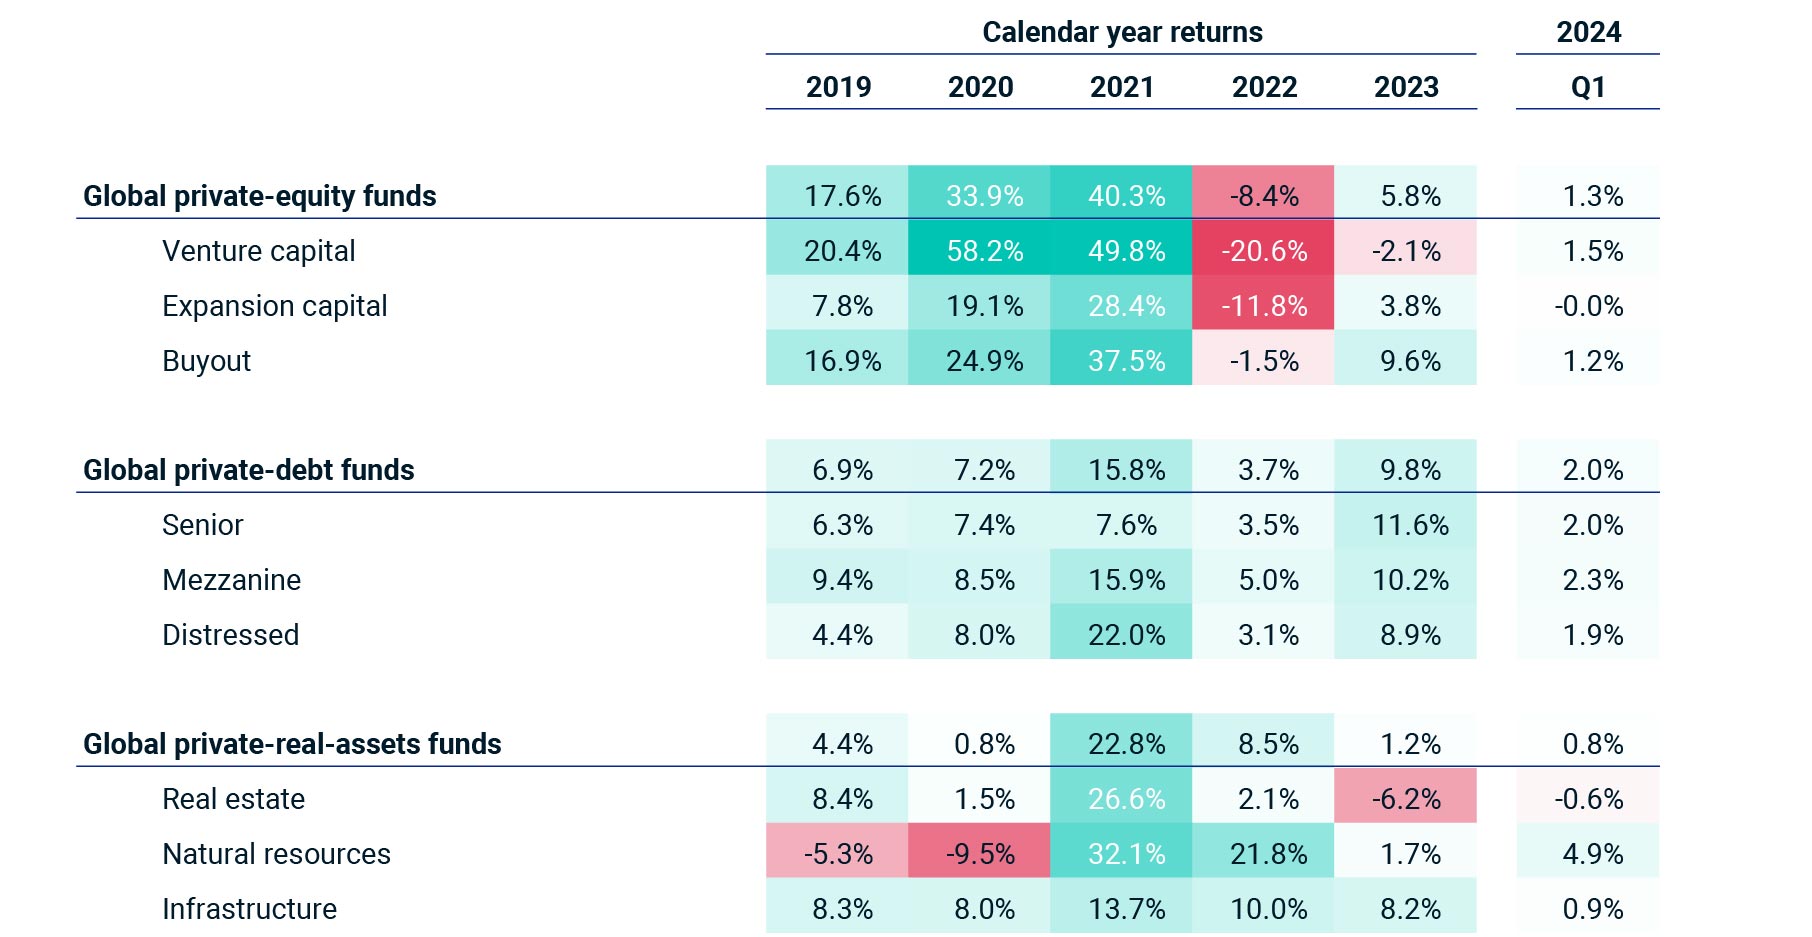 The chart is a heat table that shows the calendar year returns for various types of investment funds over the years 2019 to 2023, with an additional column for Q1 of 2024. The funds are categorized into three main types: global private-equity funds, global private-debt funds, and global private-real-assets funds. Each category is further divided into subcategories such as venture capital, expansion capital, and buyout for private-equity funds; senior, mezzanine, and distressed for private-debt funds; and real estate, natural resources, and infrastructure for private-real-assets funds. 